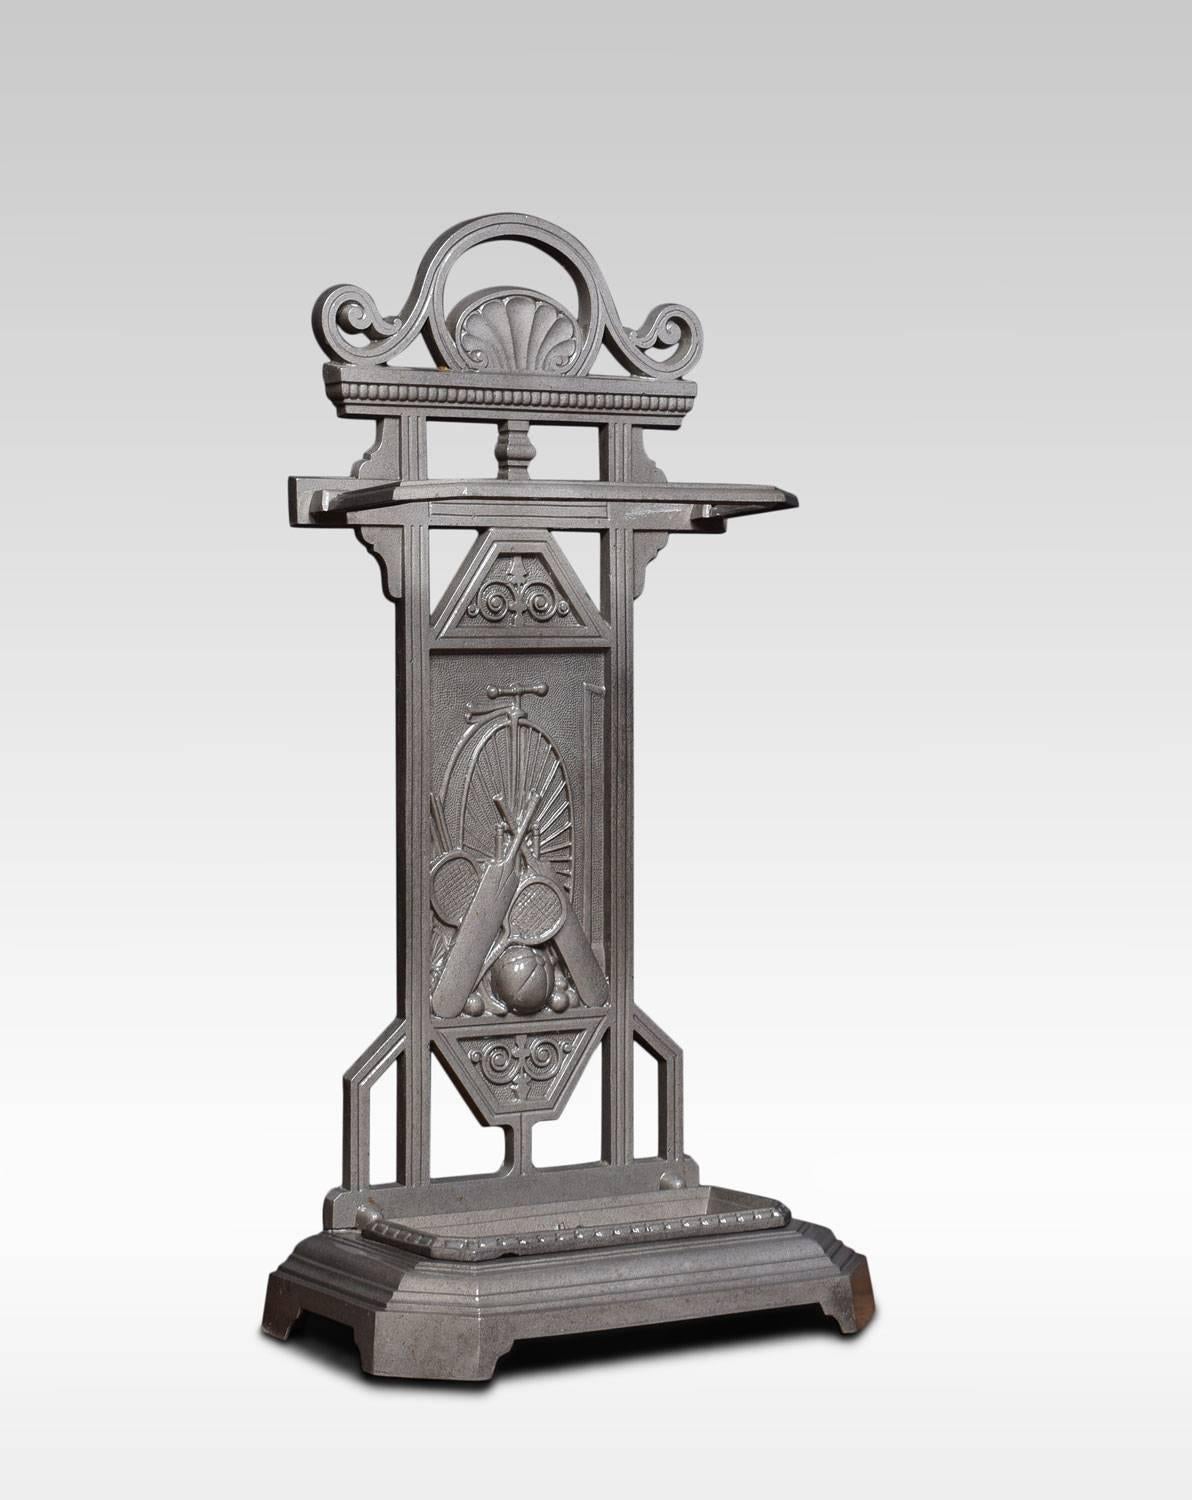 19th century cast iron stick or umbrella stand, the backplate with sporting motif and penny farthing in background. All raised up on plinth base incorporating original drip trays. The manner reminiscent of Thomas Jekyll.
Dimensions:
Height 30.5